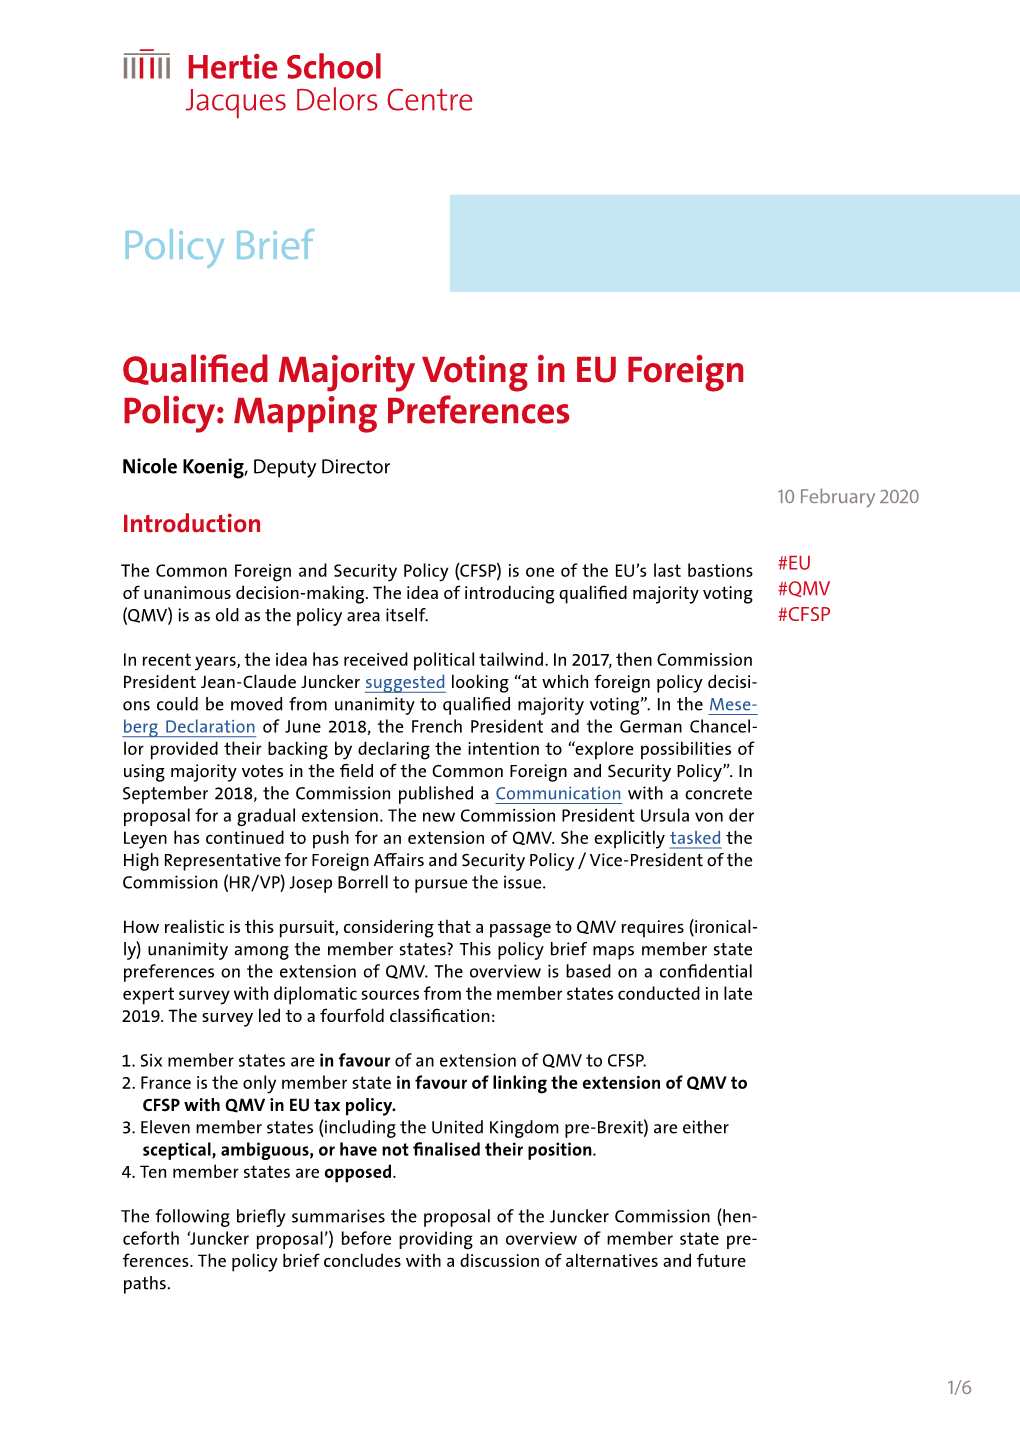 Qualified Majority Voting in EU Foreign Policy: Mapping Preferences